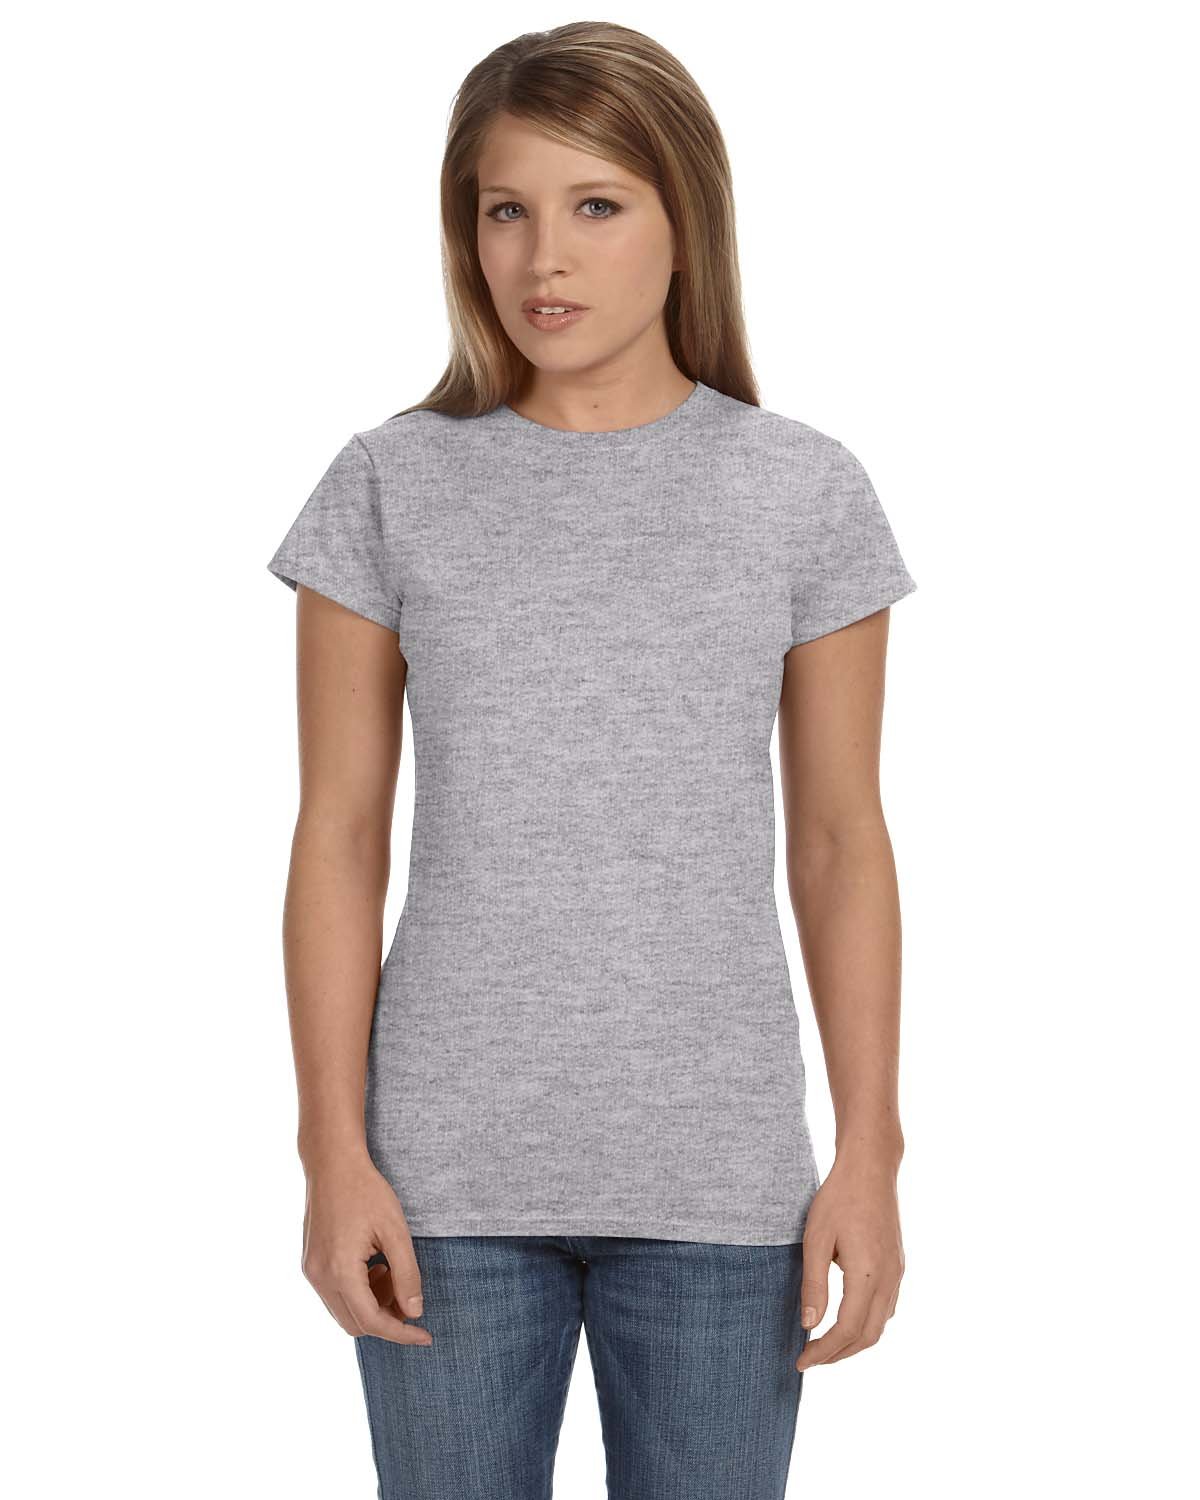 Gildan Ladies' Softstyle® Fitted T-Shirt RS SPORT GREY 